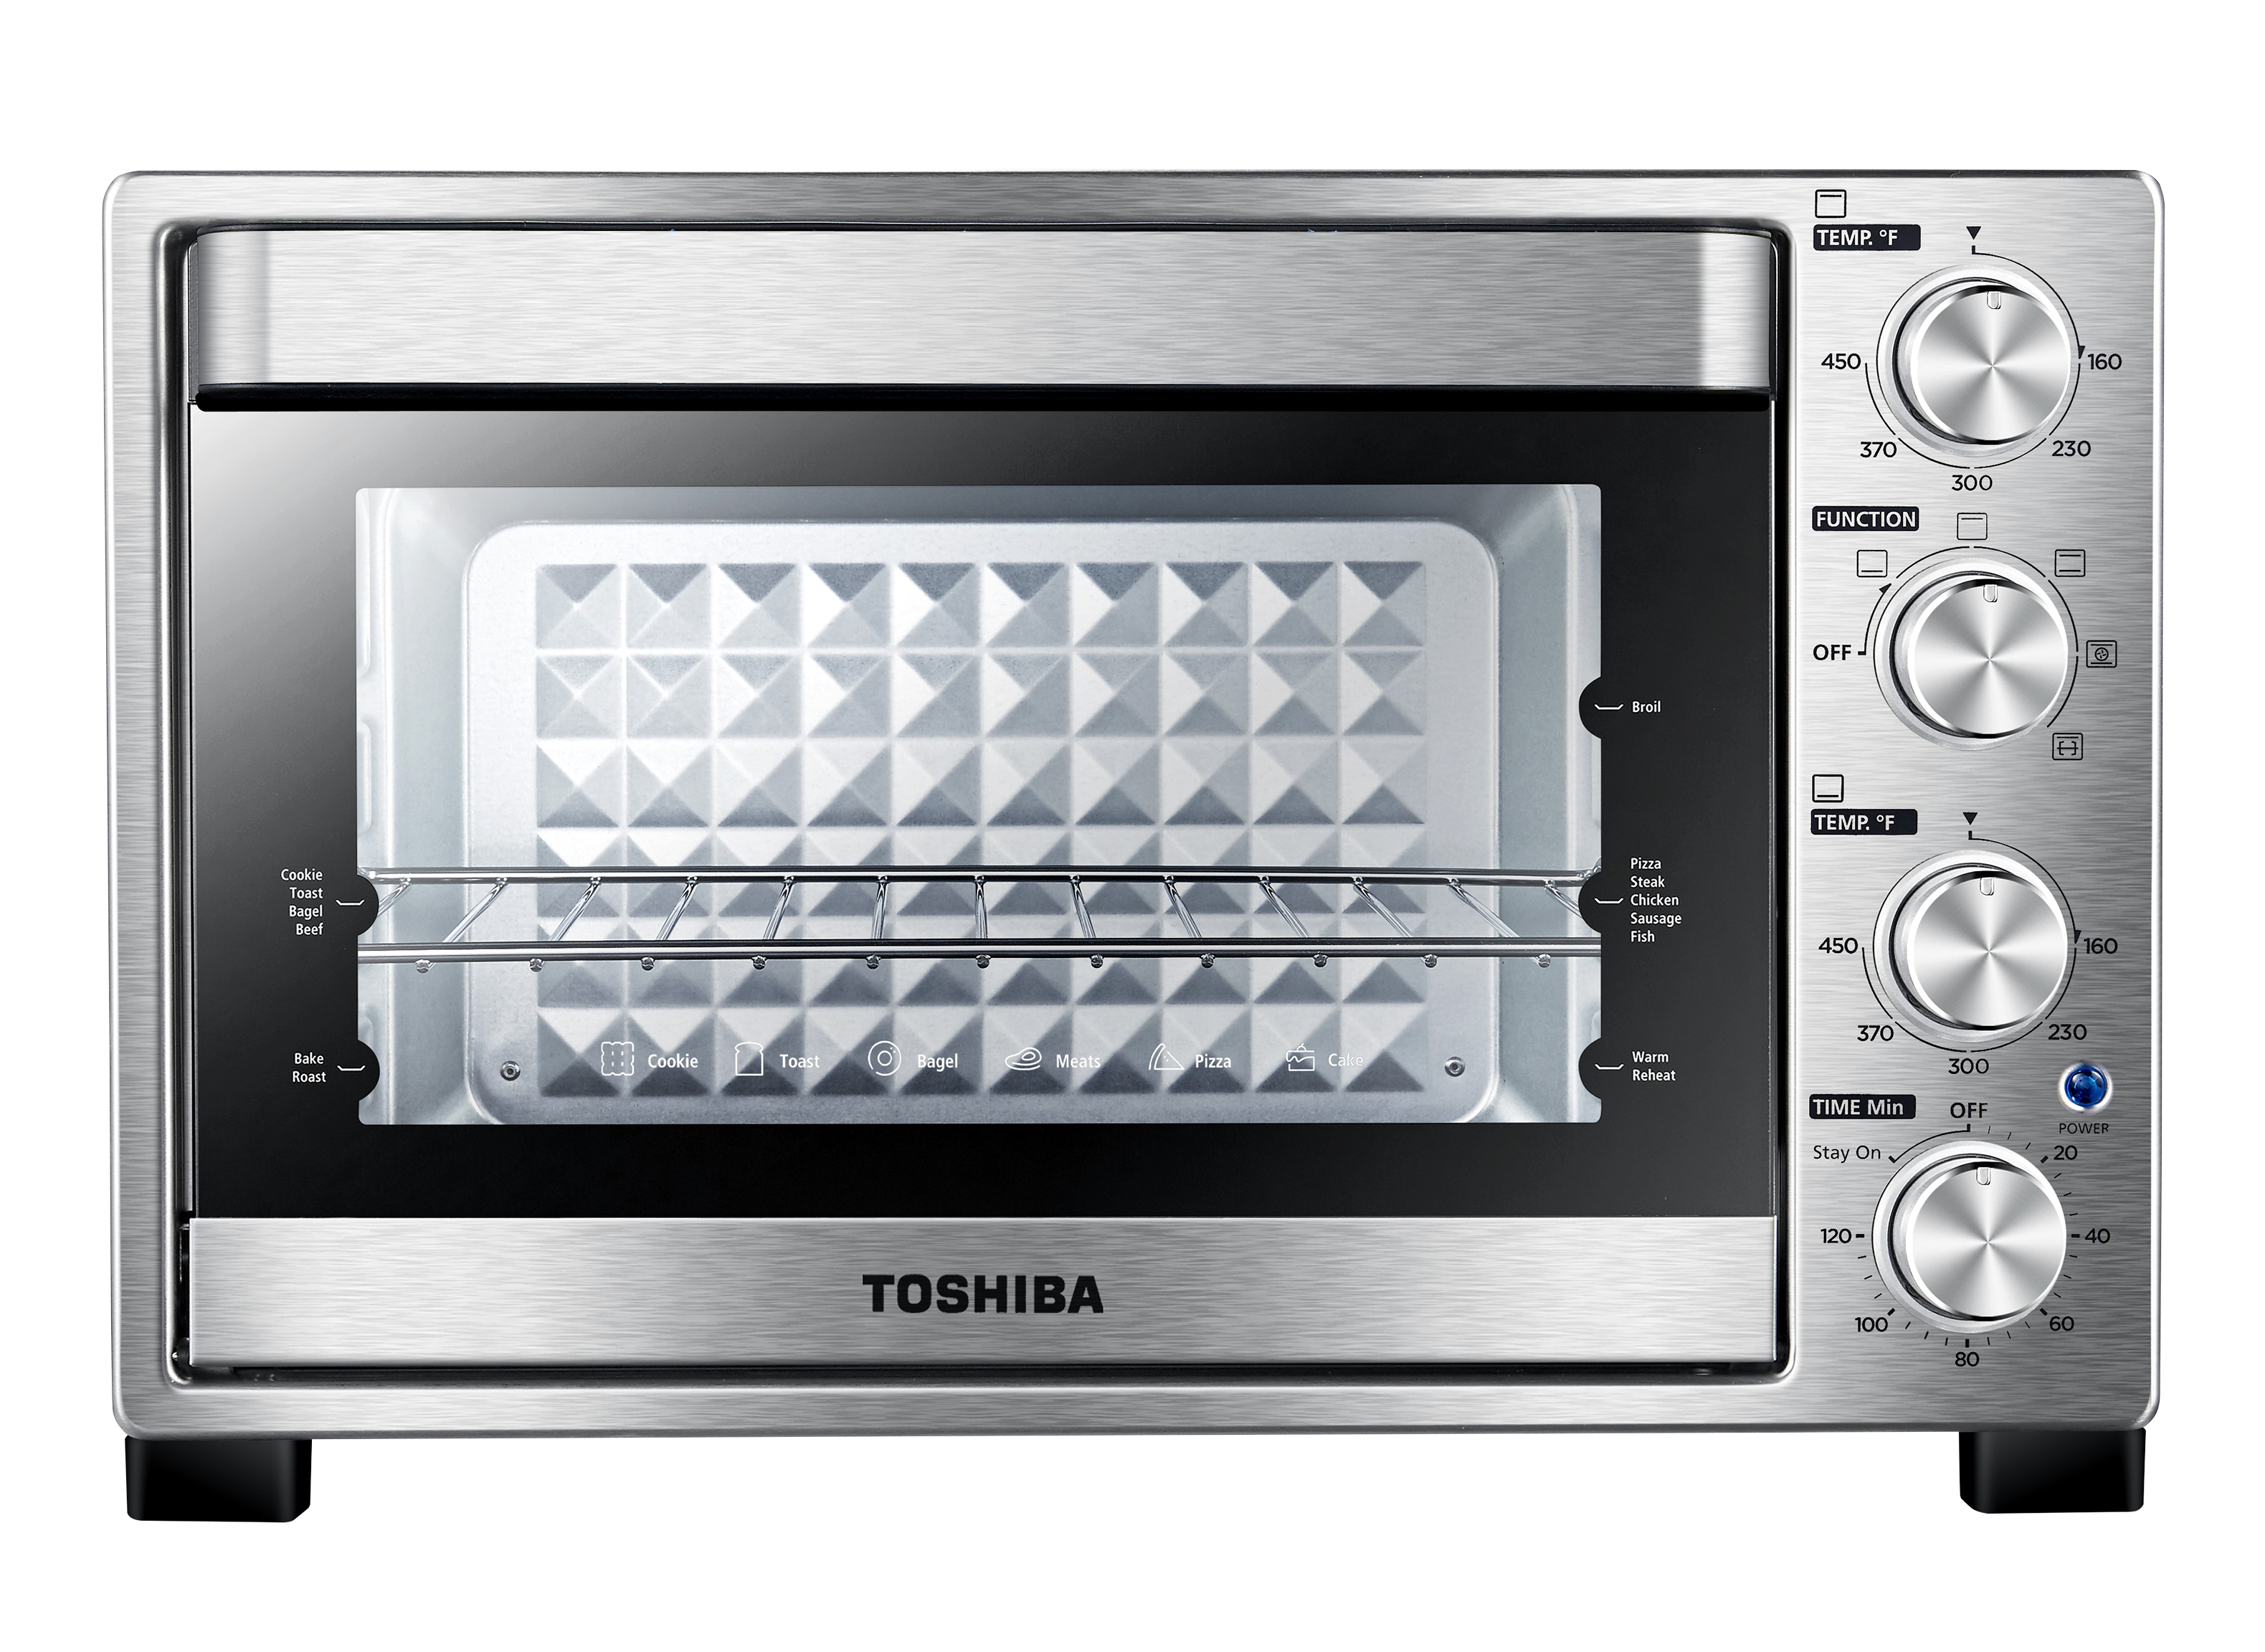 https://crdms.images.consumerreports.org/prod/products/cr/models/397411-toaster-ovens-toshiba-convection-mc32acg-chss-10002459.png